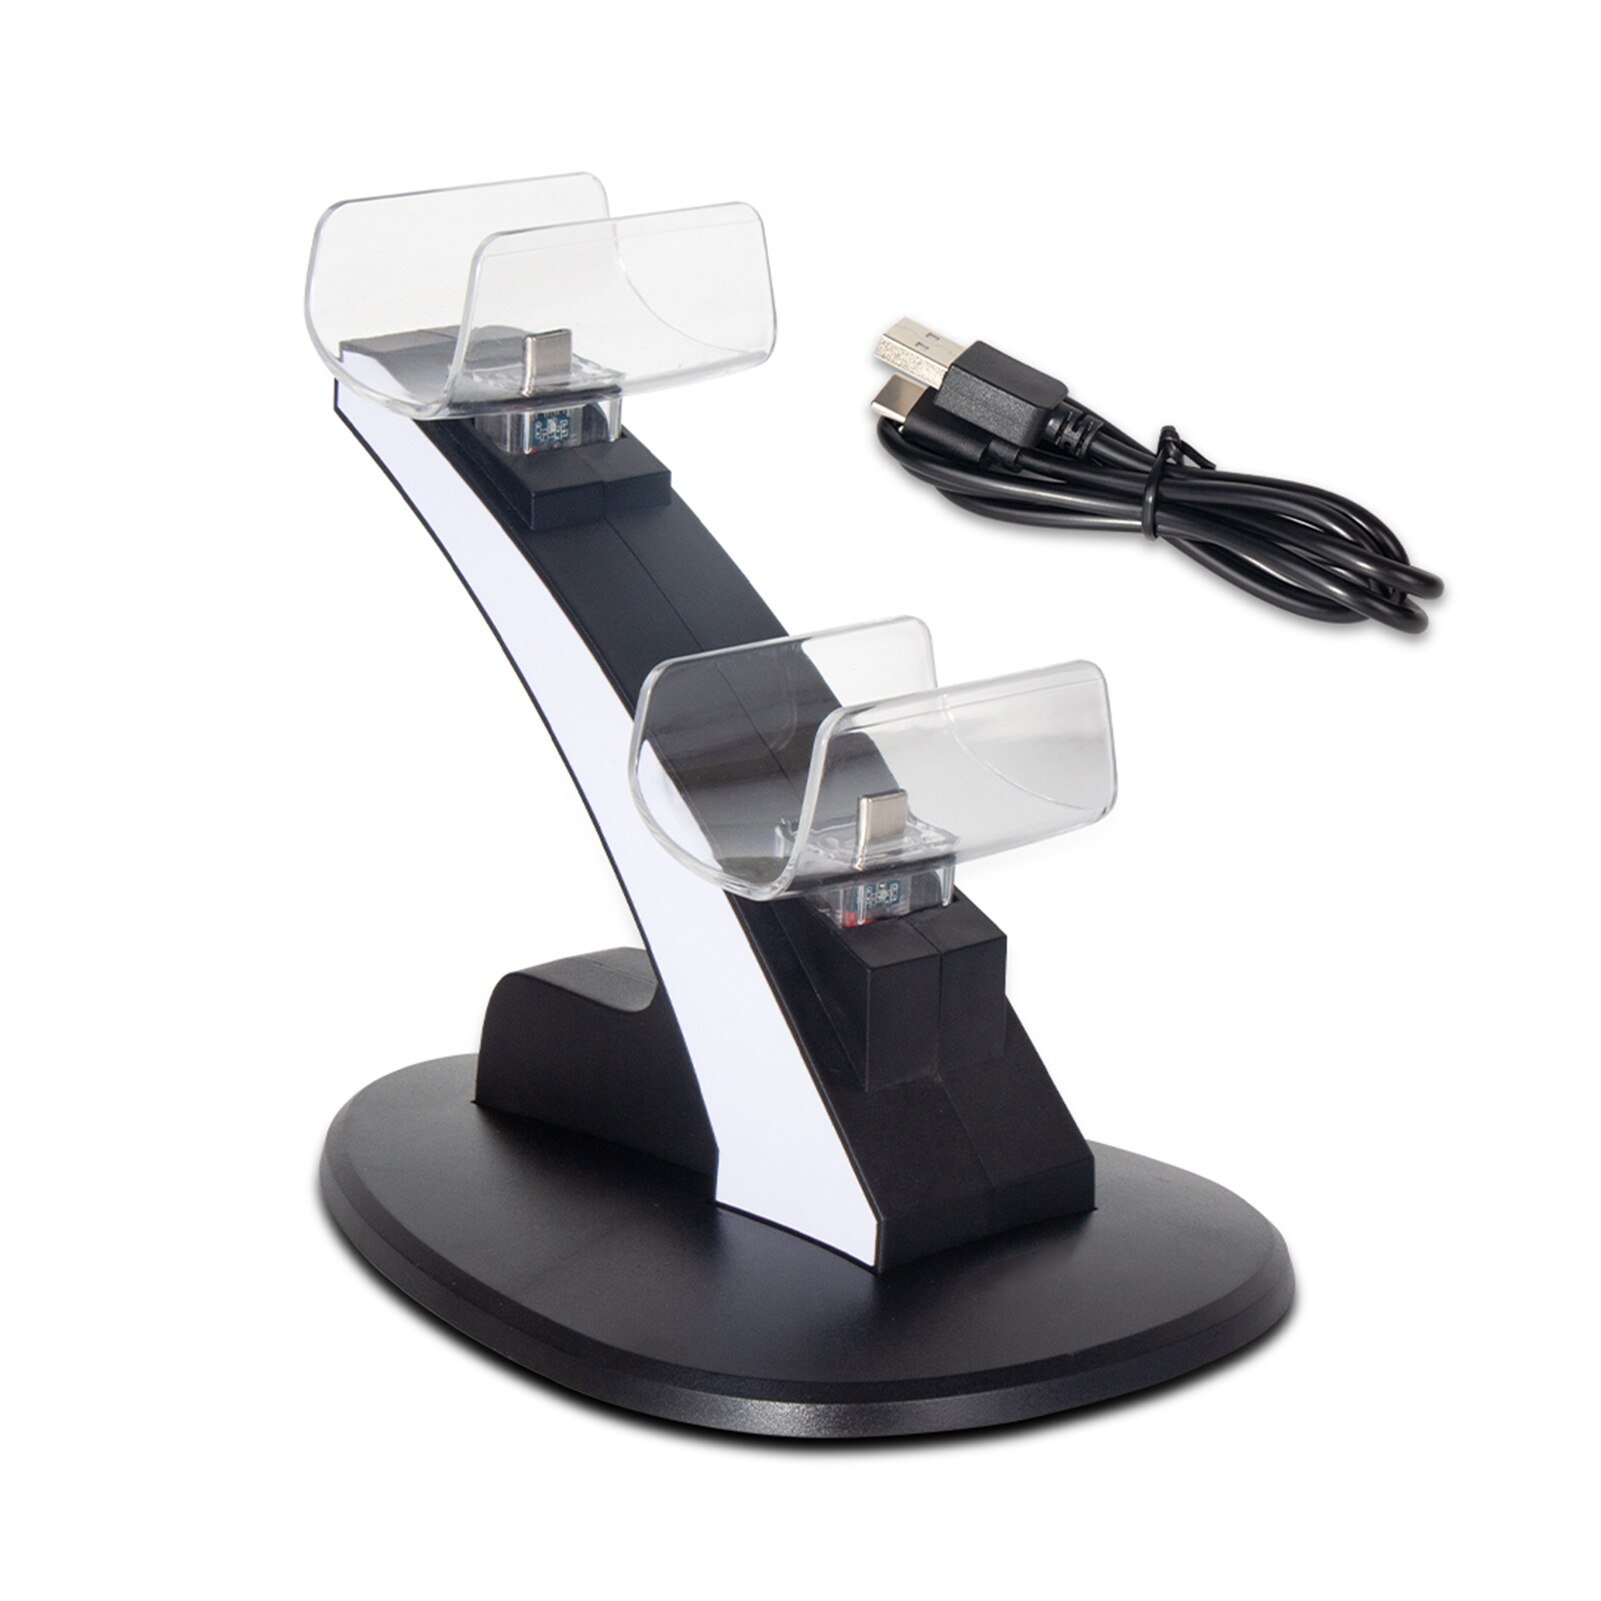 PS5 Controller Oplader Dubbele Usb Snel Opladen Docking Station Stand & Led Indicator Voor Ps 5 Controllers